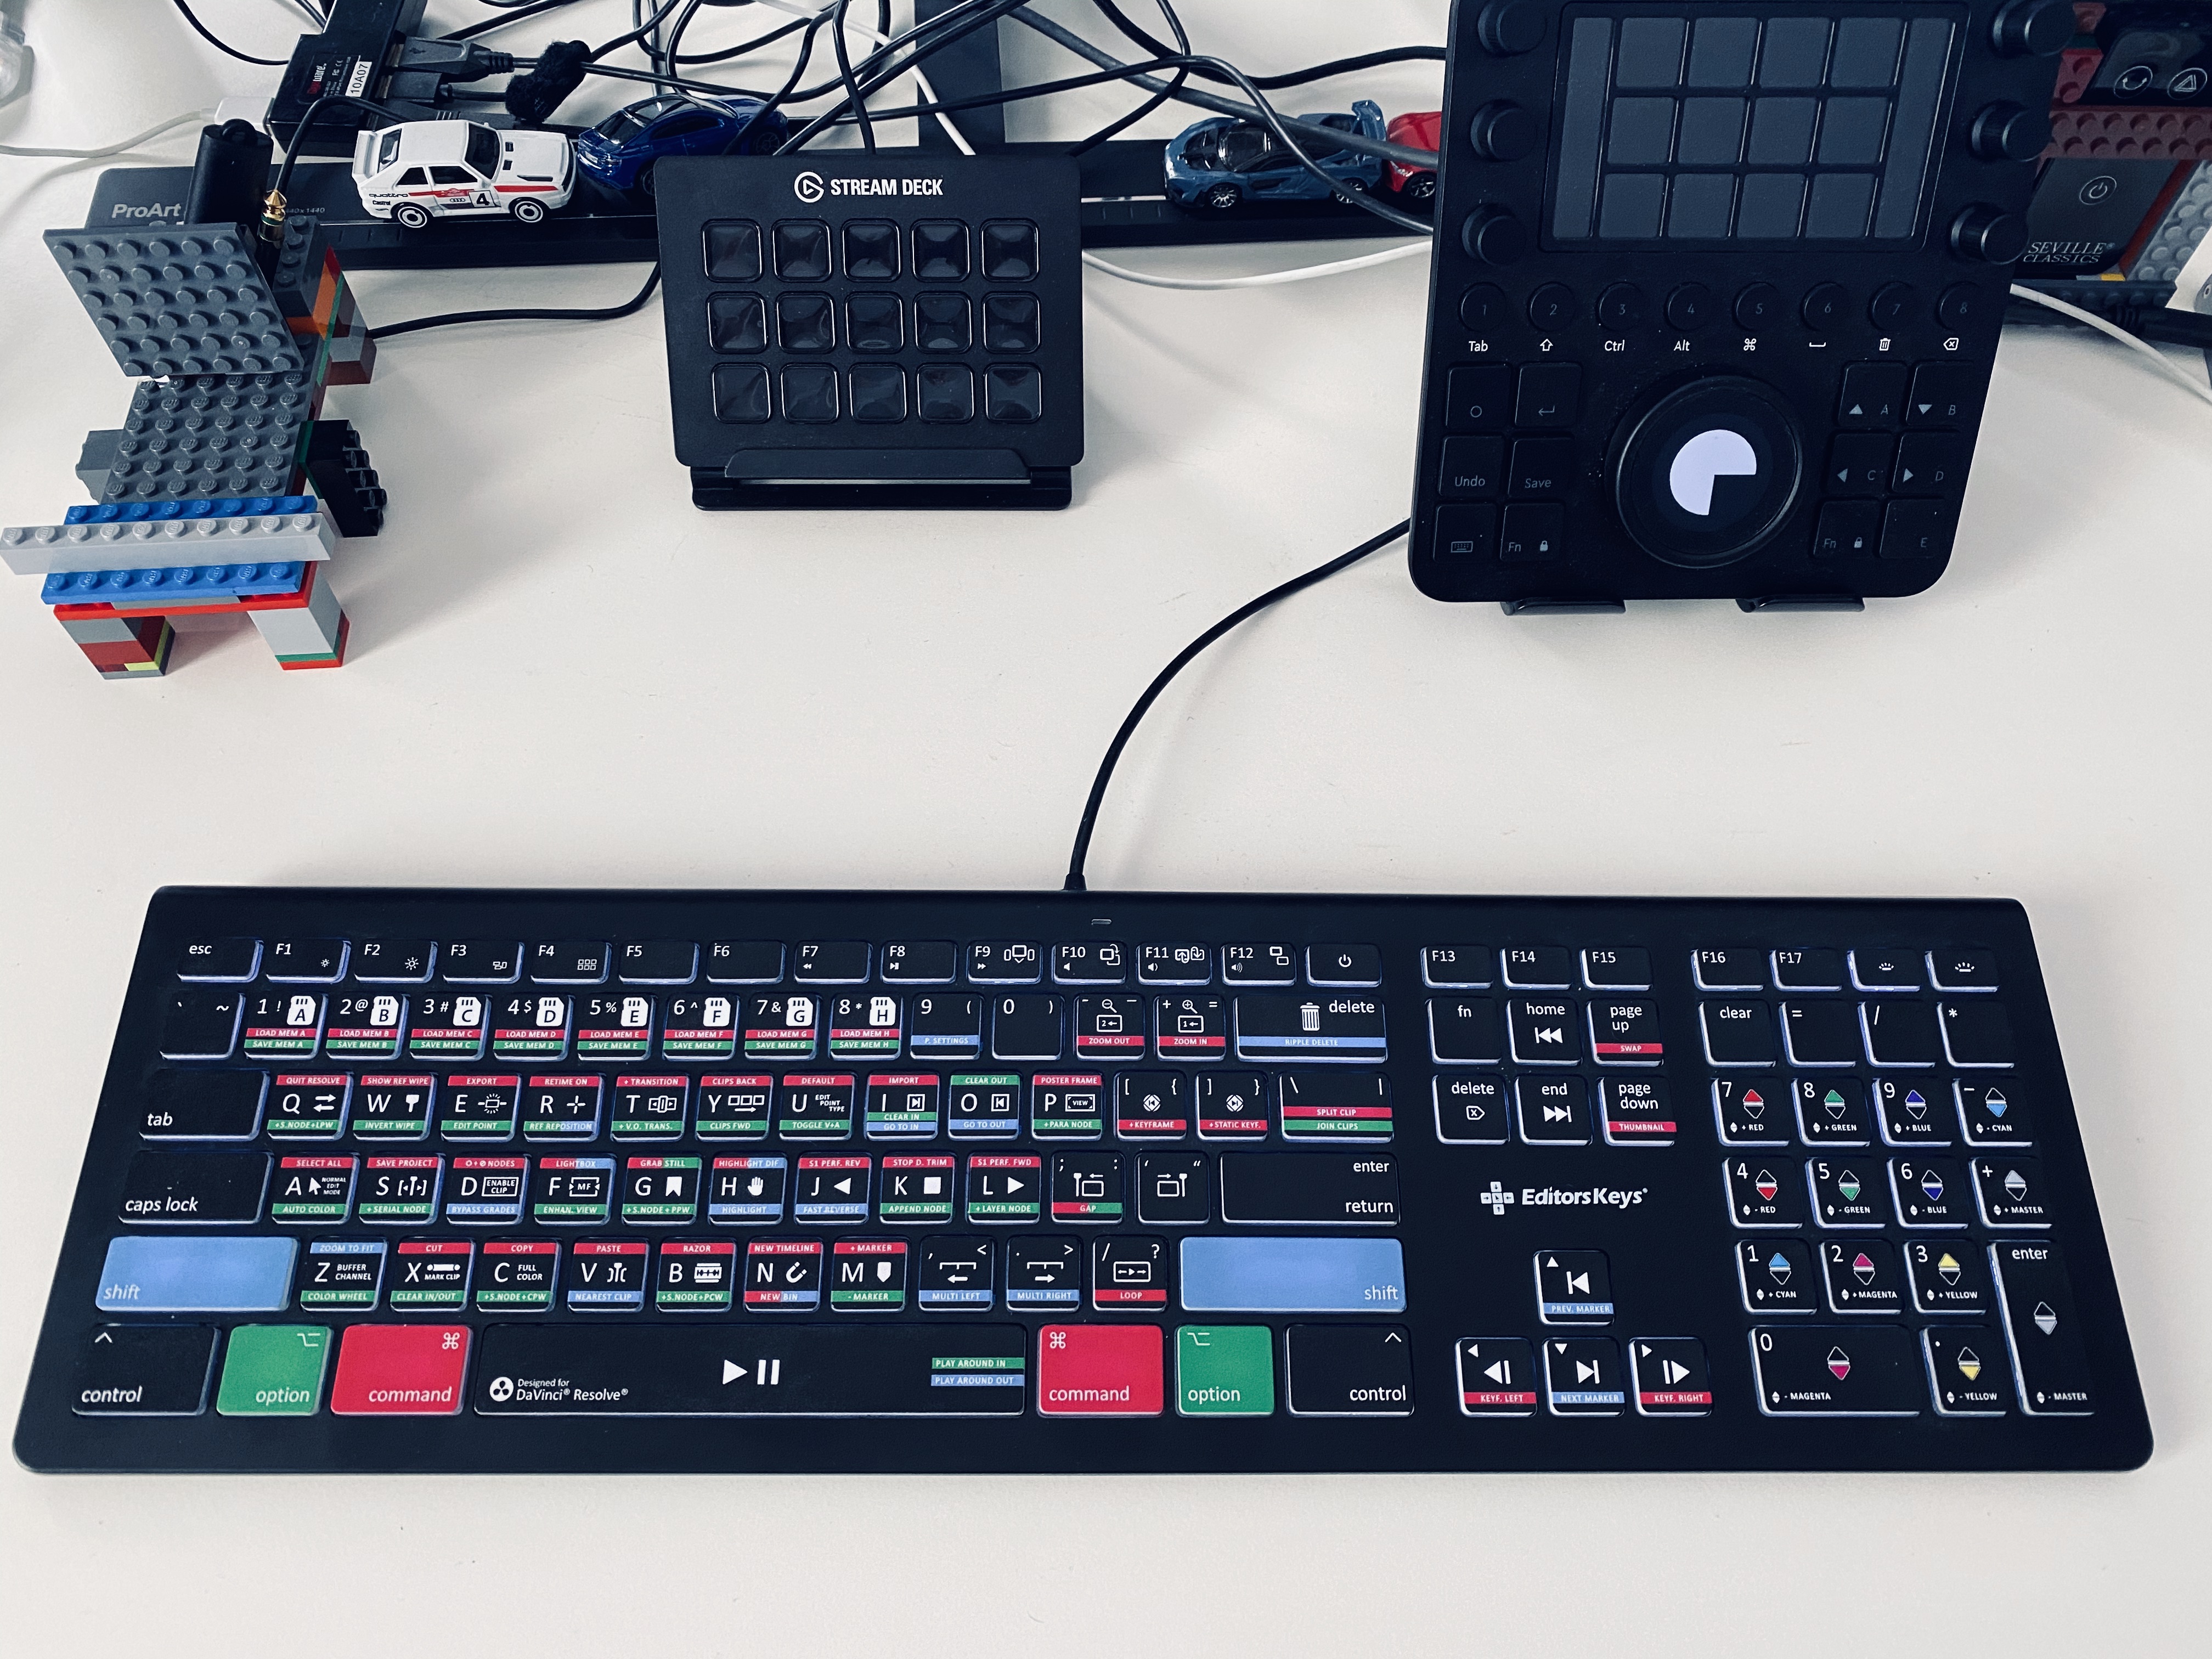 The OTHER DaVinci Resolve keyboard that can be used for editing 10